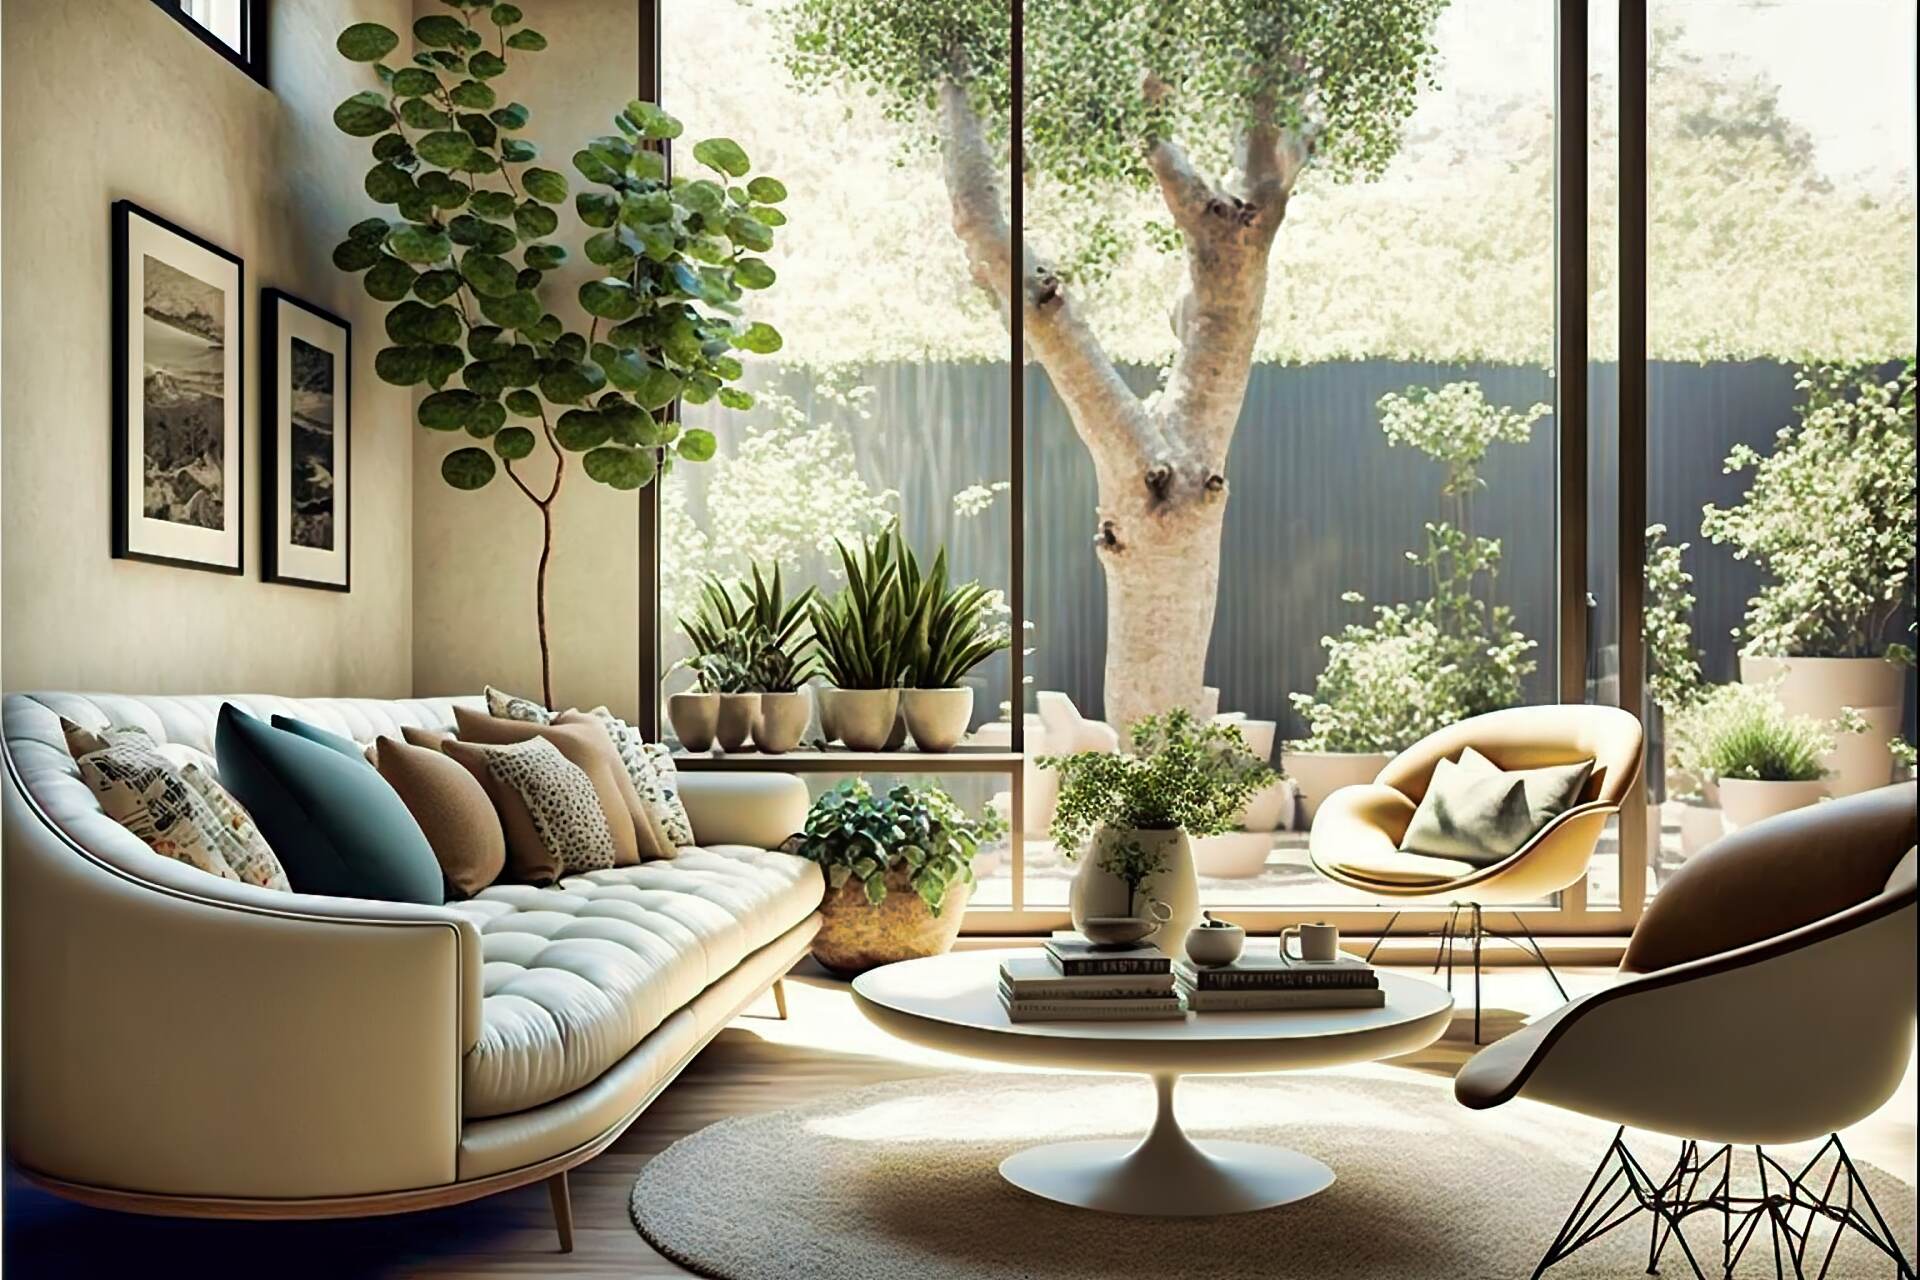 This Bright Modern Living Room Features Plenty Of Natural Light And Neutral Colors. A Comfortable Beige Sofa And Matching Armchair Provide The Perfect Place To Relax, While A Light Wooden Coffee Table And A Geometric Rug Complete The Look. A Few Interesting Art Pieces And A Large Potted Plant Bring Life To The Room.